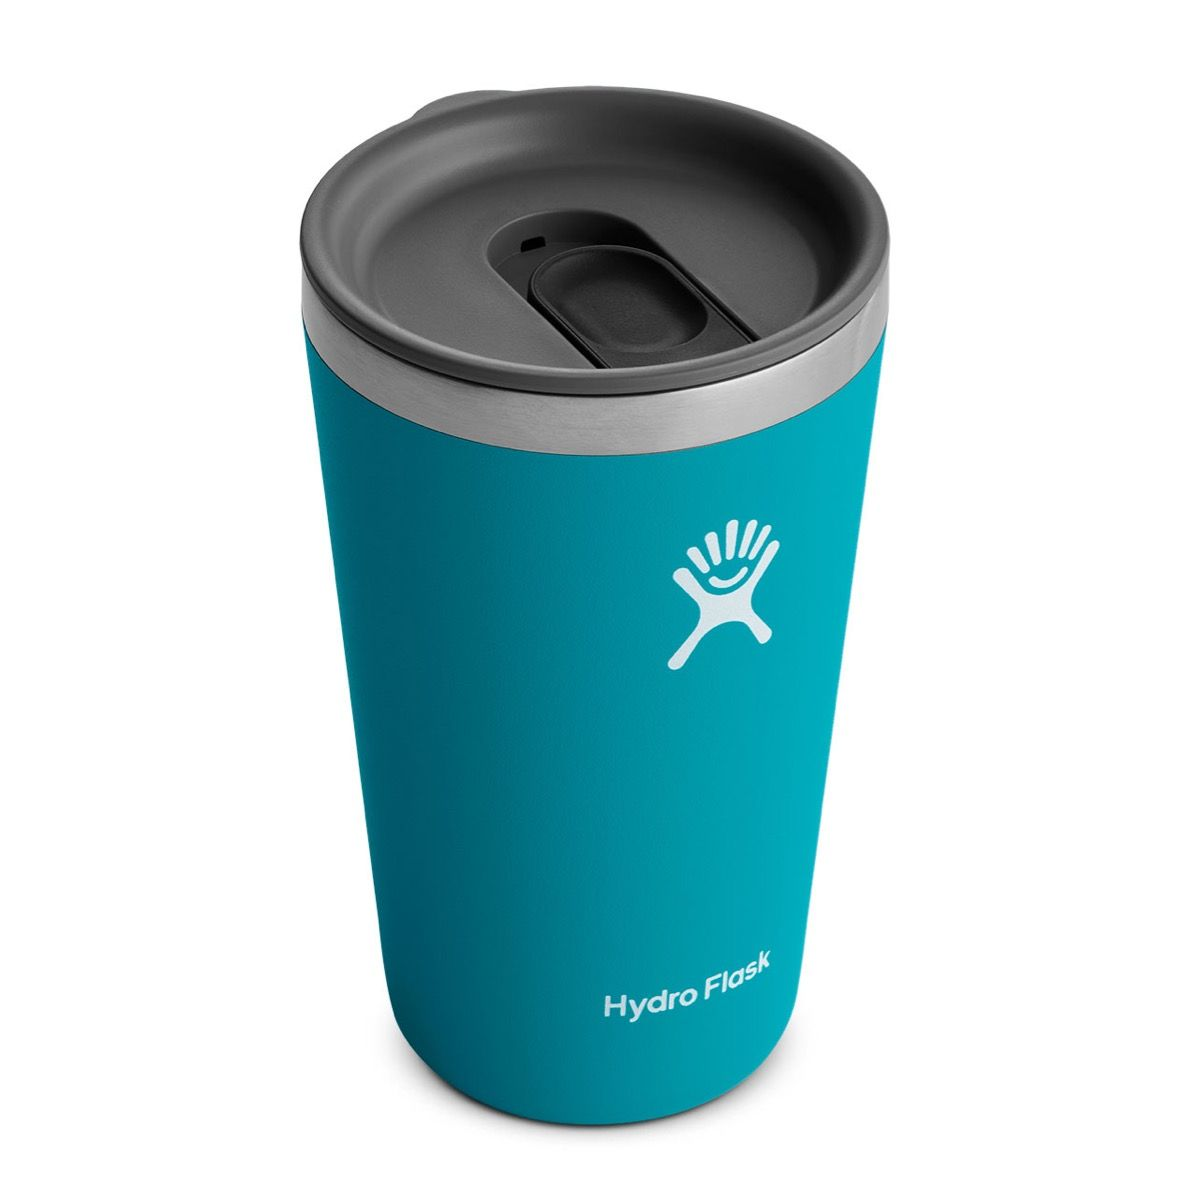 This Hydro Flask Keeps Tallboy Cans Chilled